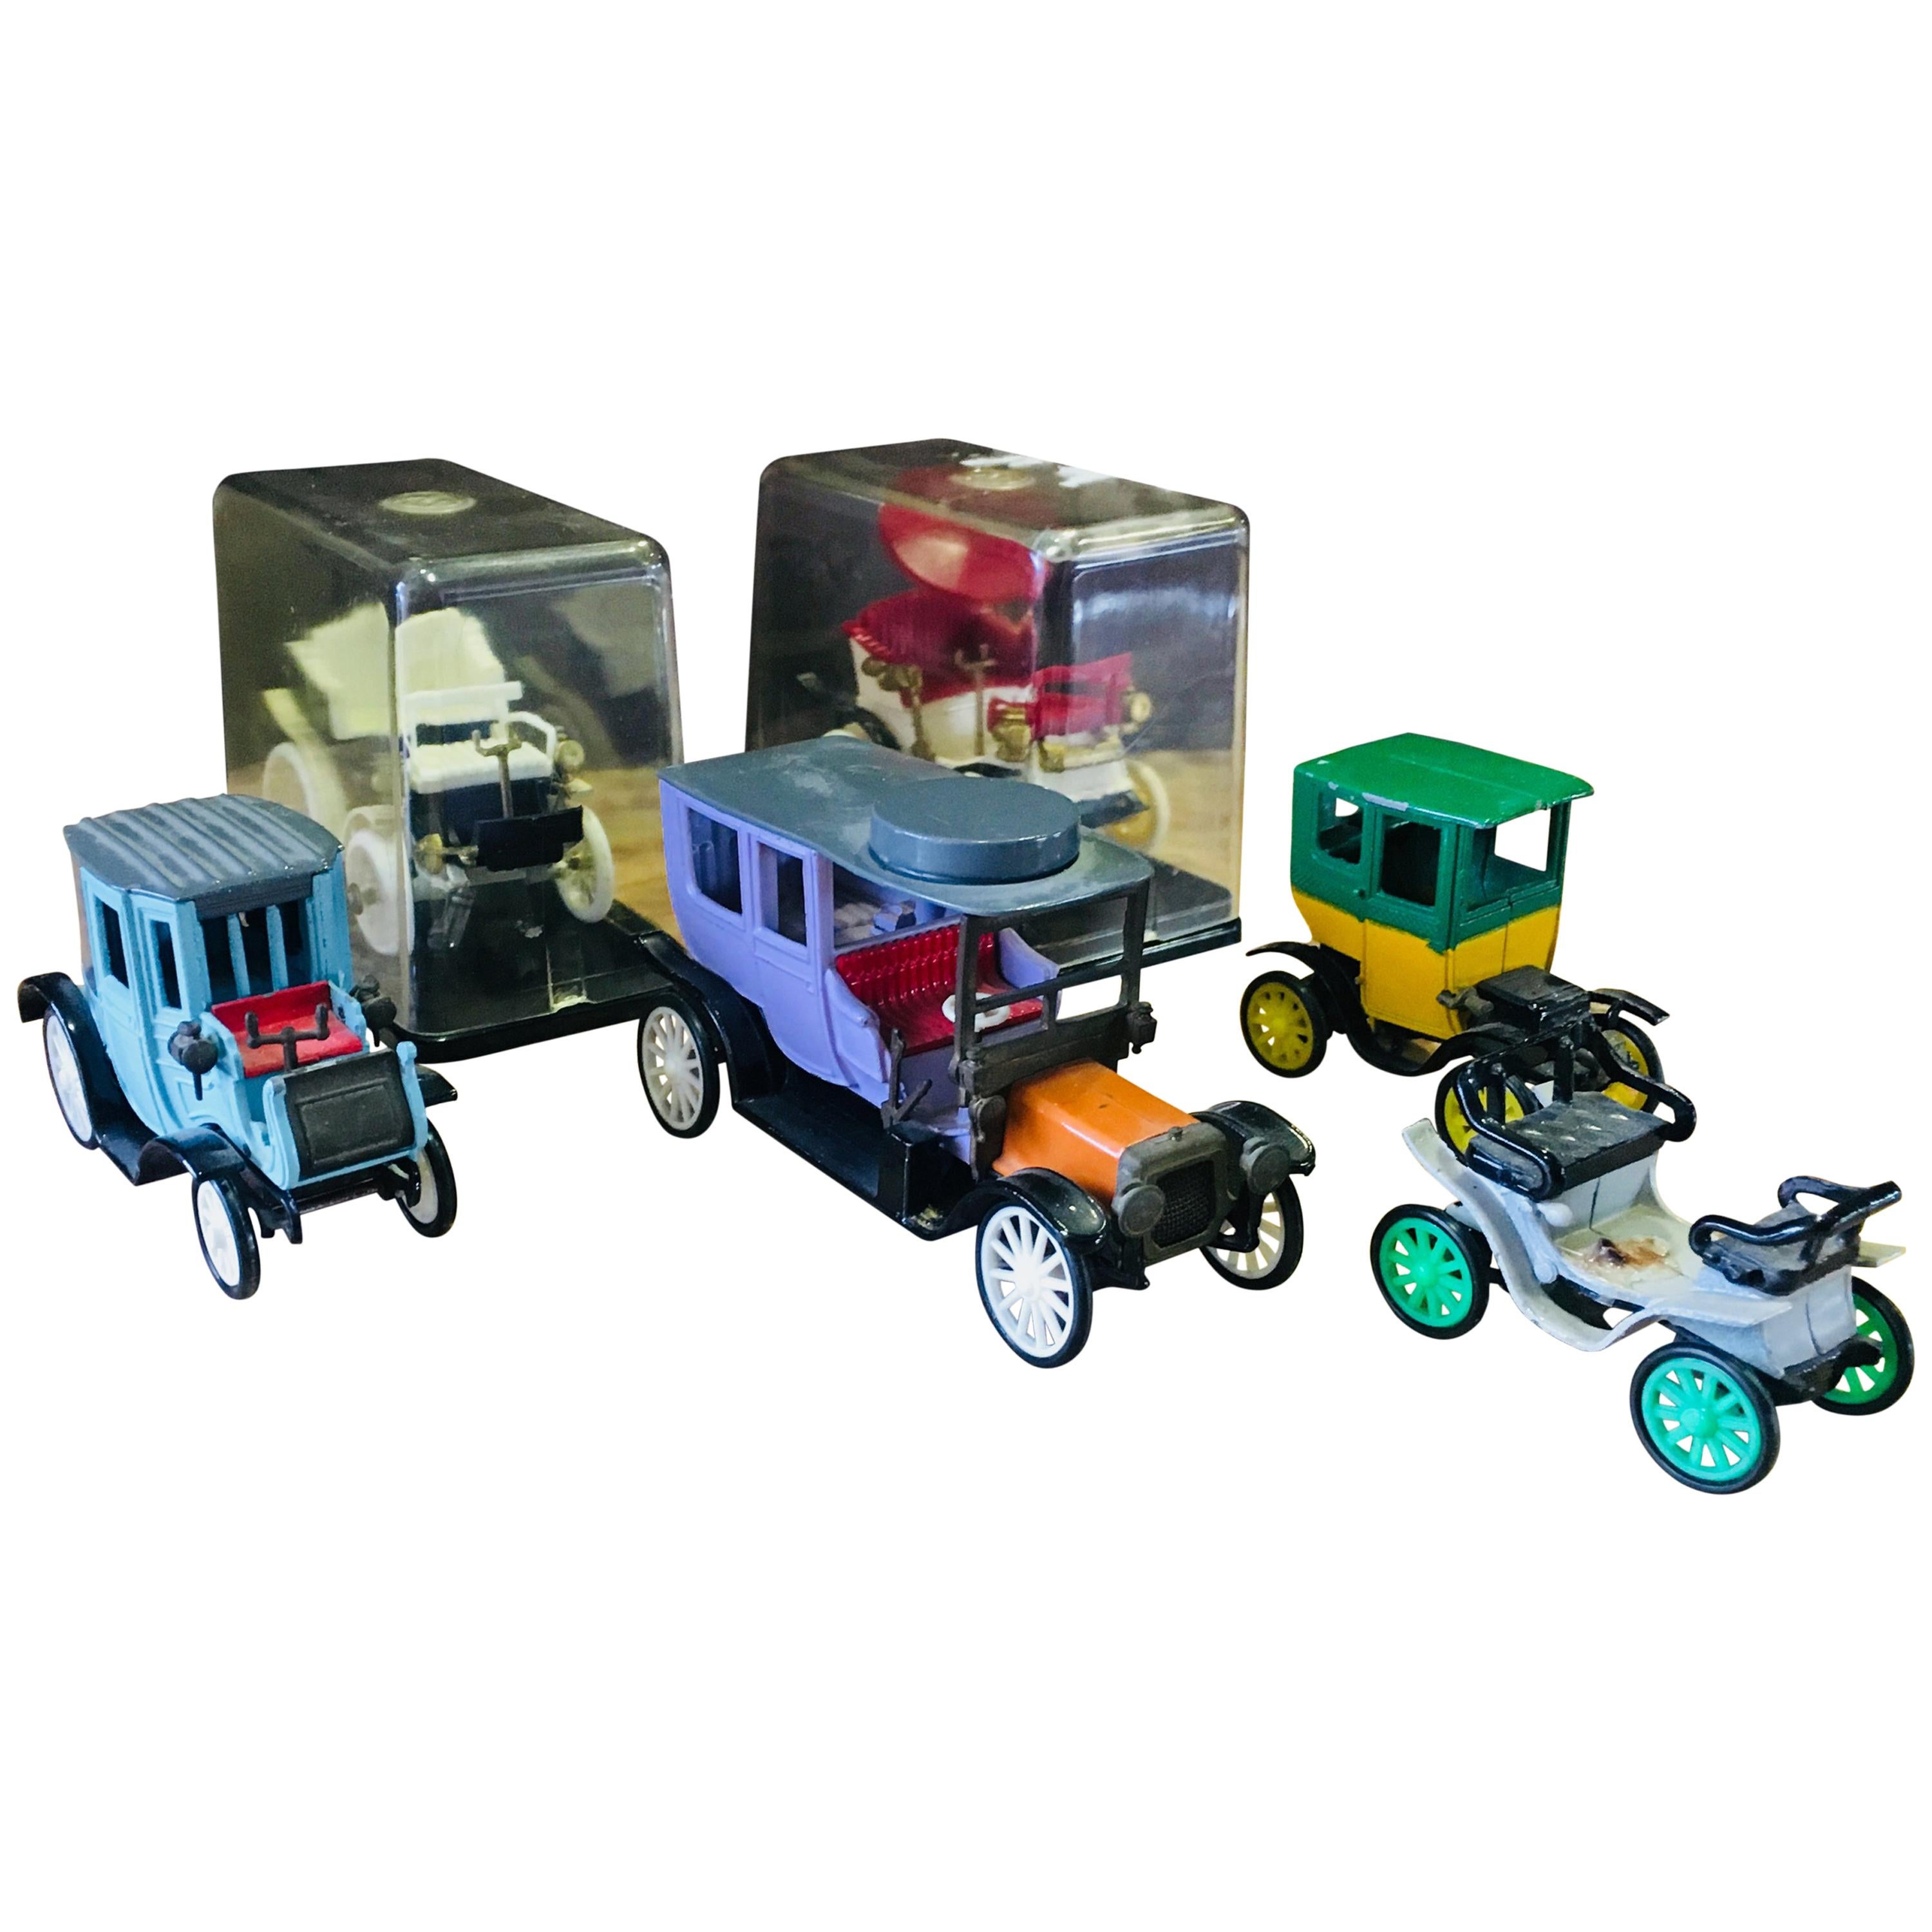 Vintage French Child's Collectable Toy-Cars For Sale